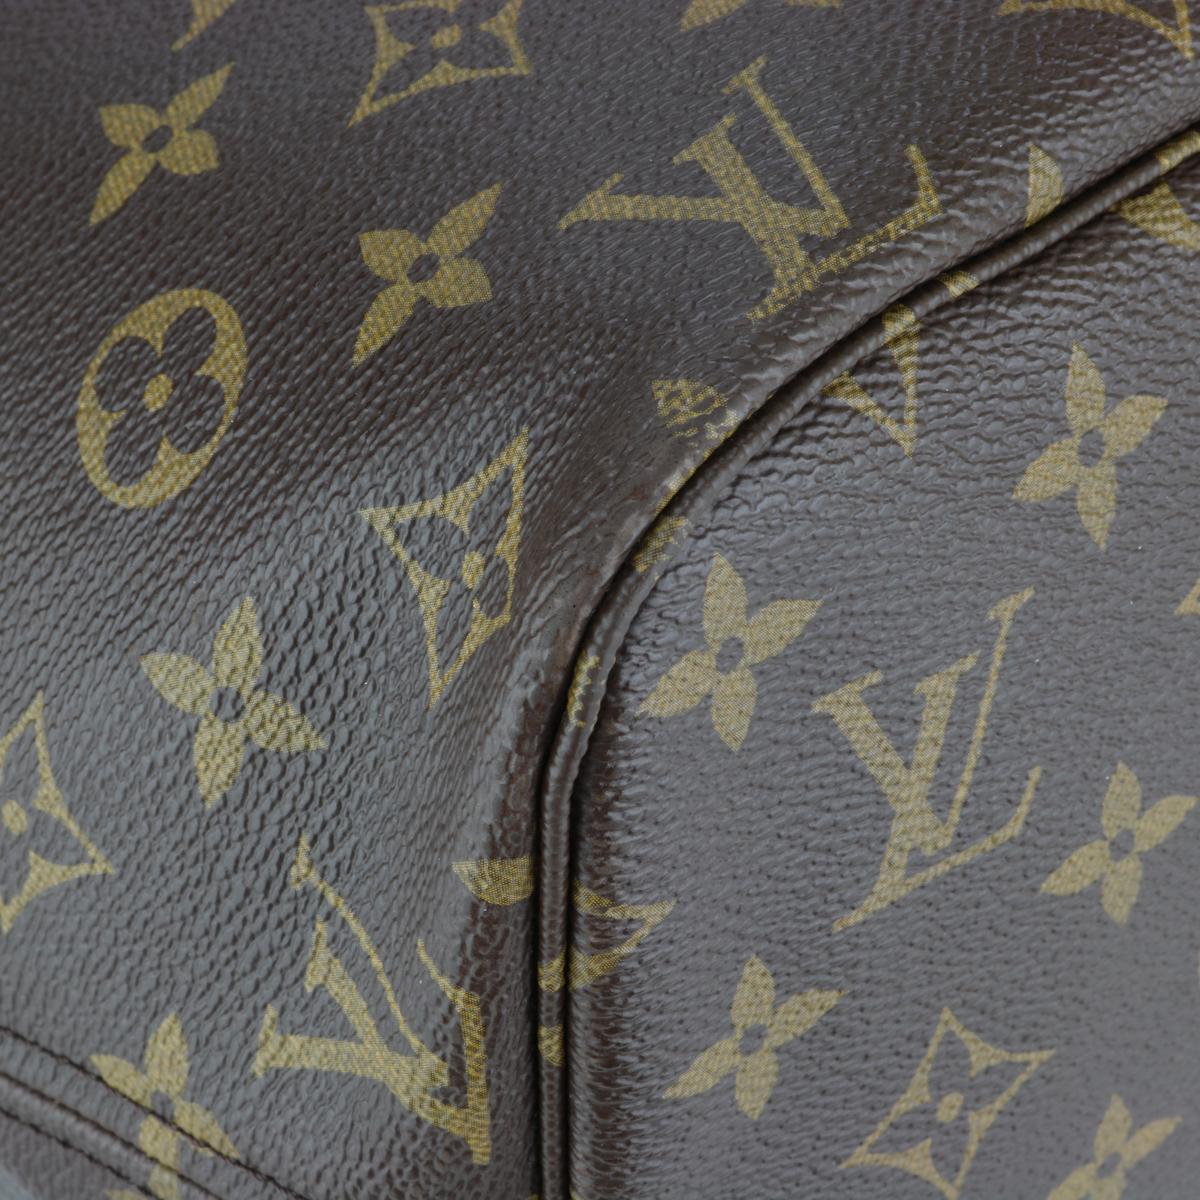 Louis Vuitton Neverfull MM Bag in Monogram with Beige Interior 2014 For Sale 1